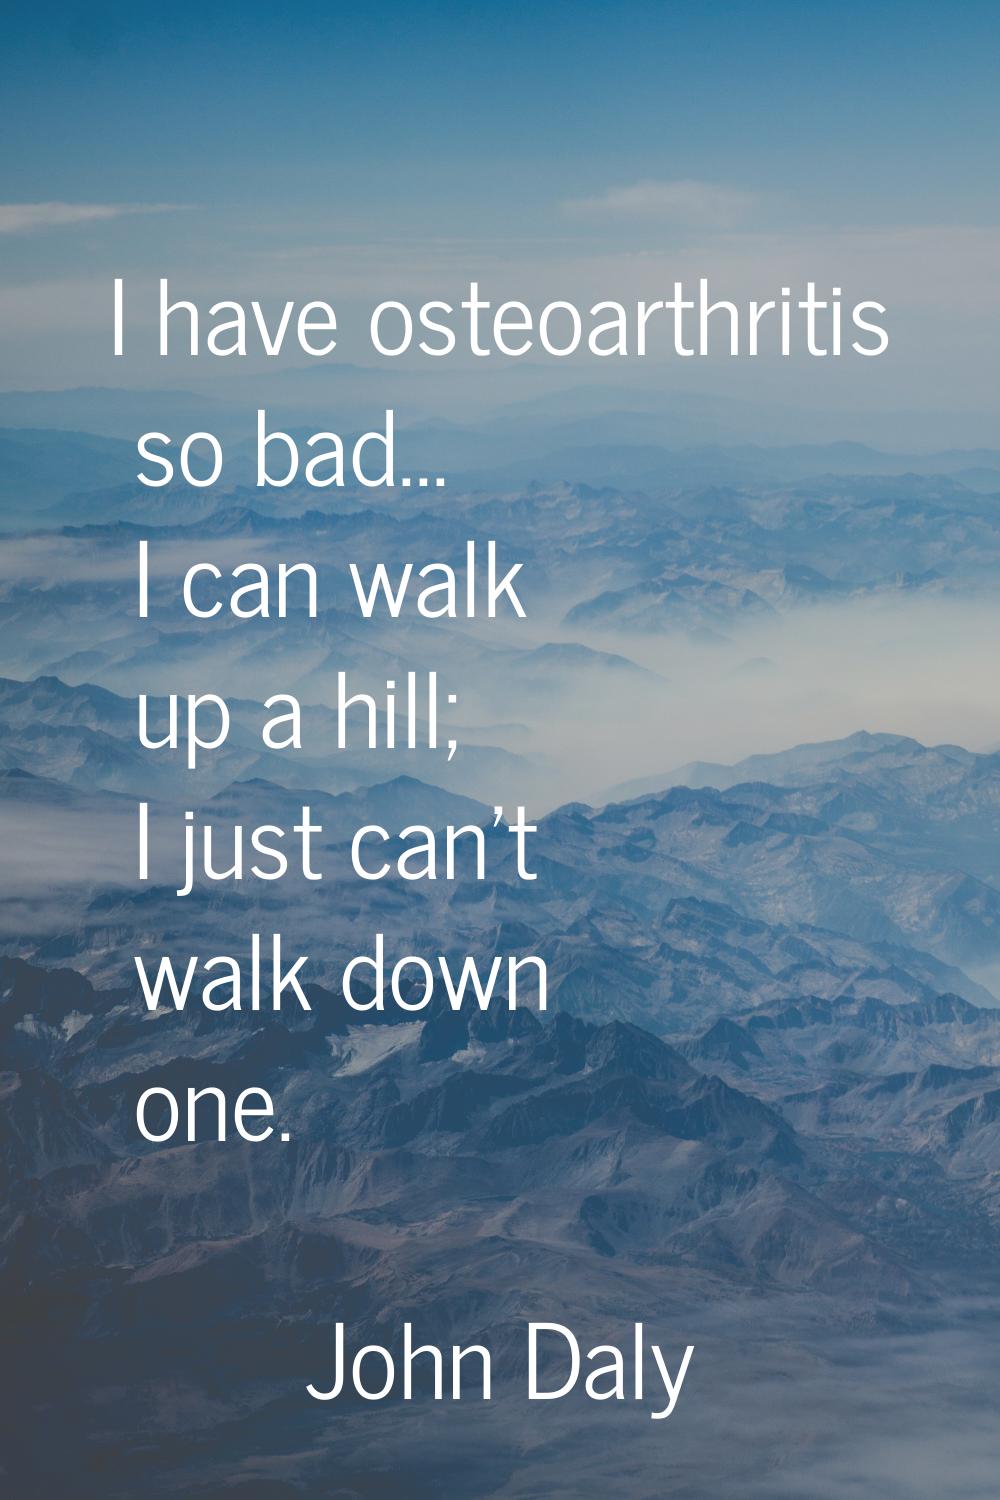 I have osteoarthritis so bad... I can walk up a hill; I just can't walk down one.